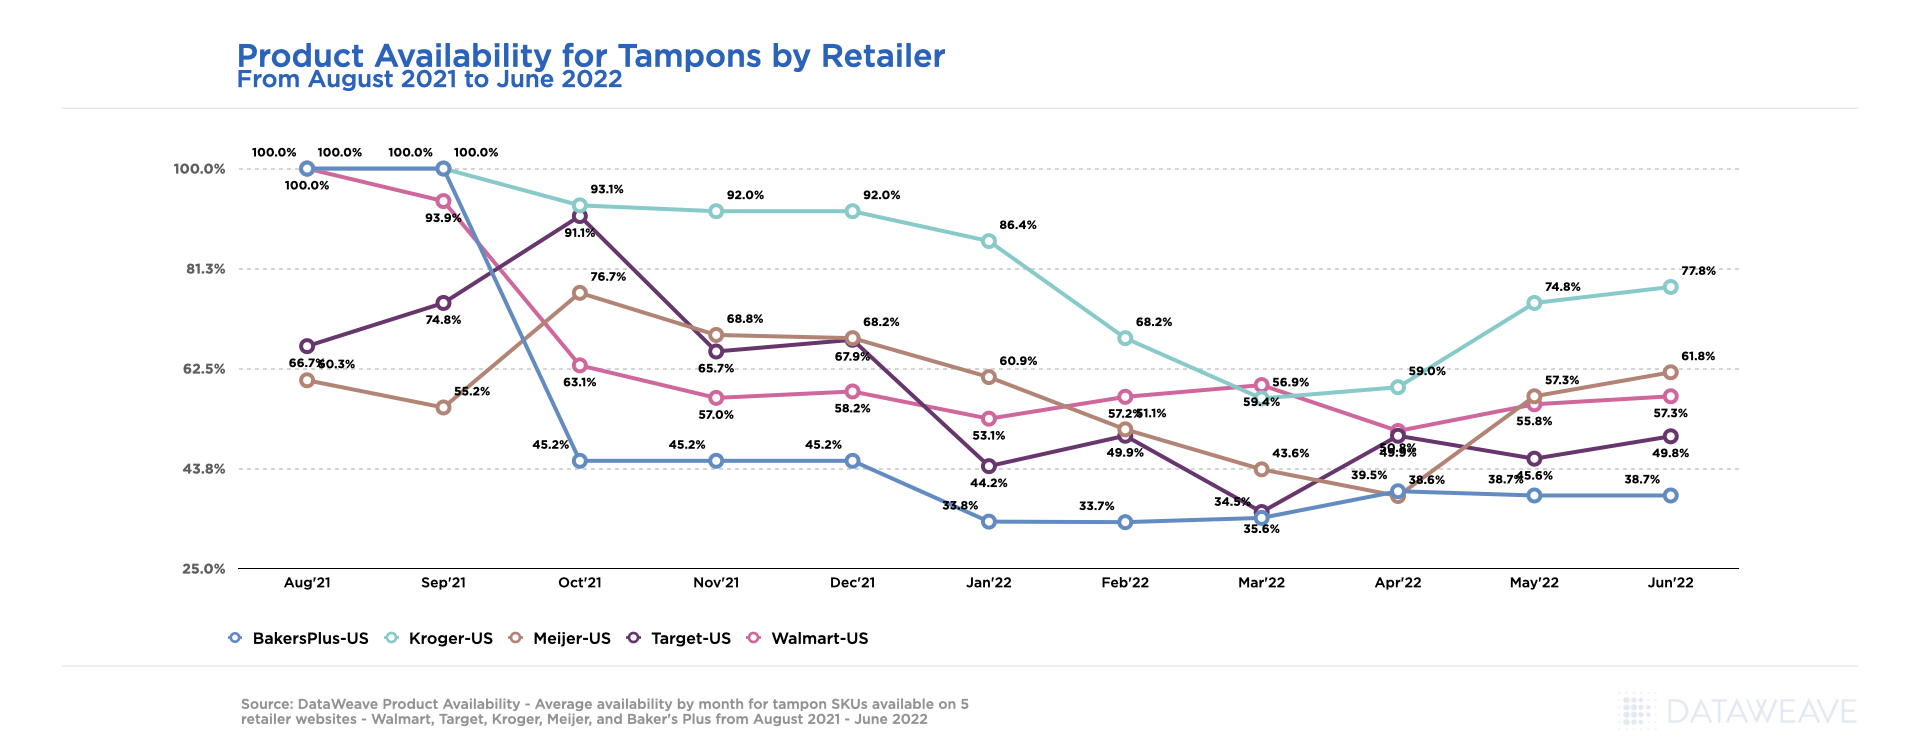 Product Availability for Tampons by Retailer - June 2022